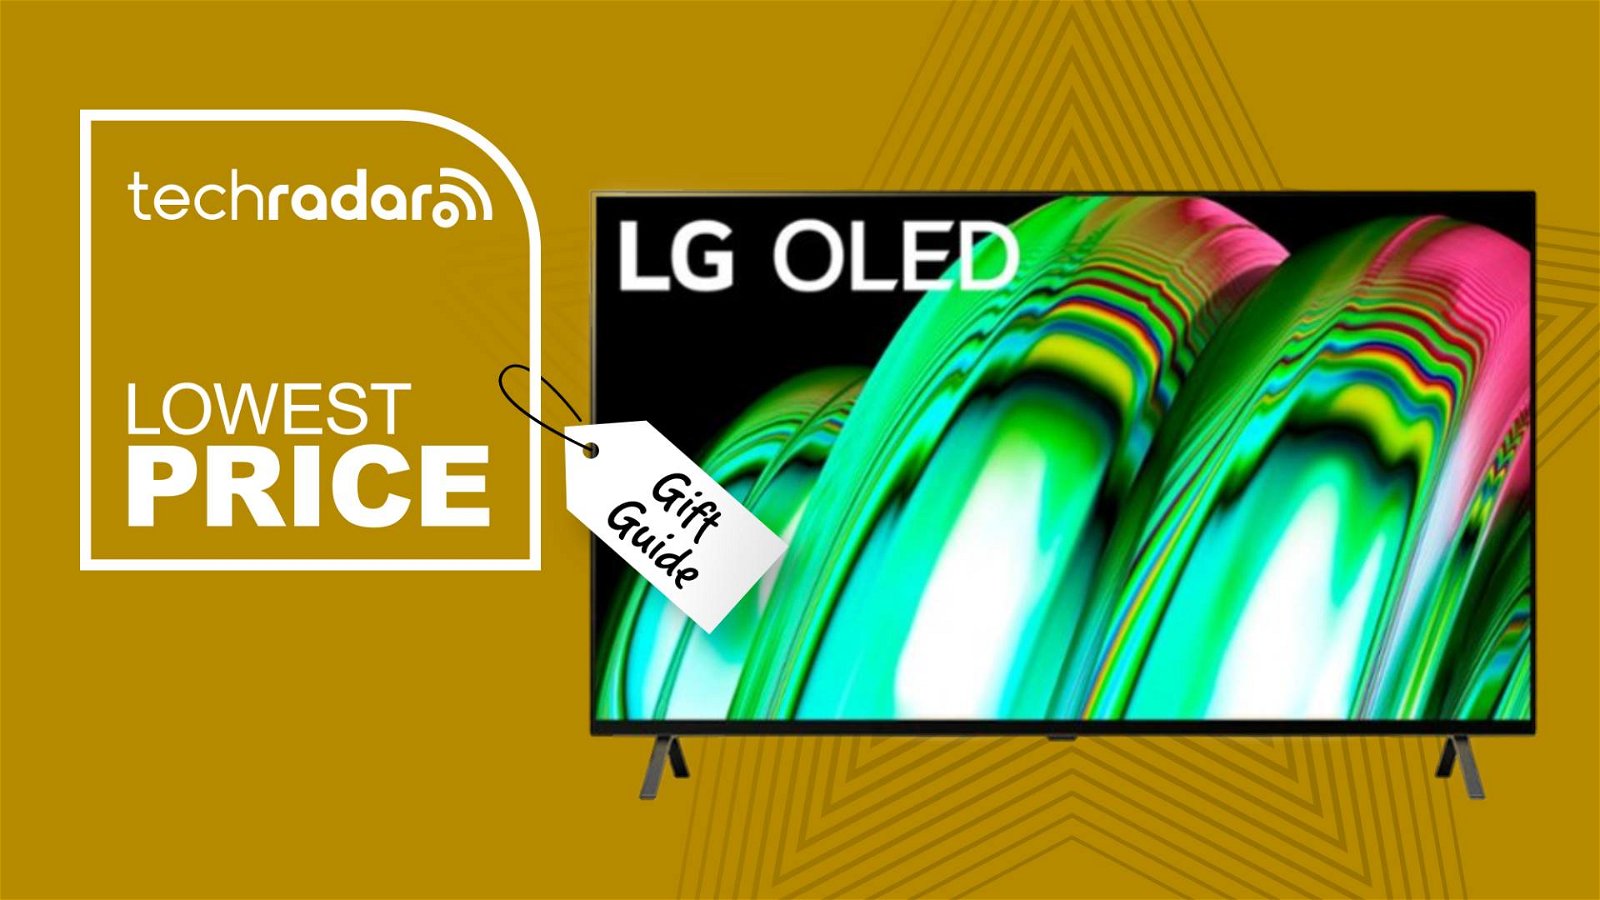 An LG OLED TV for under 600 This holiday deal